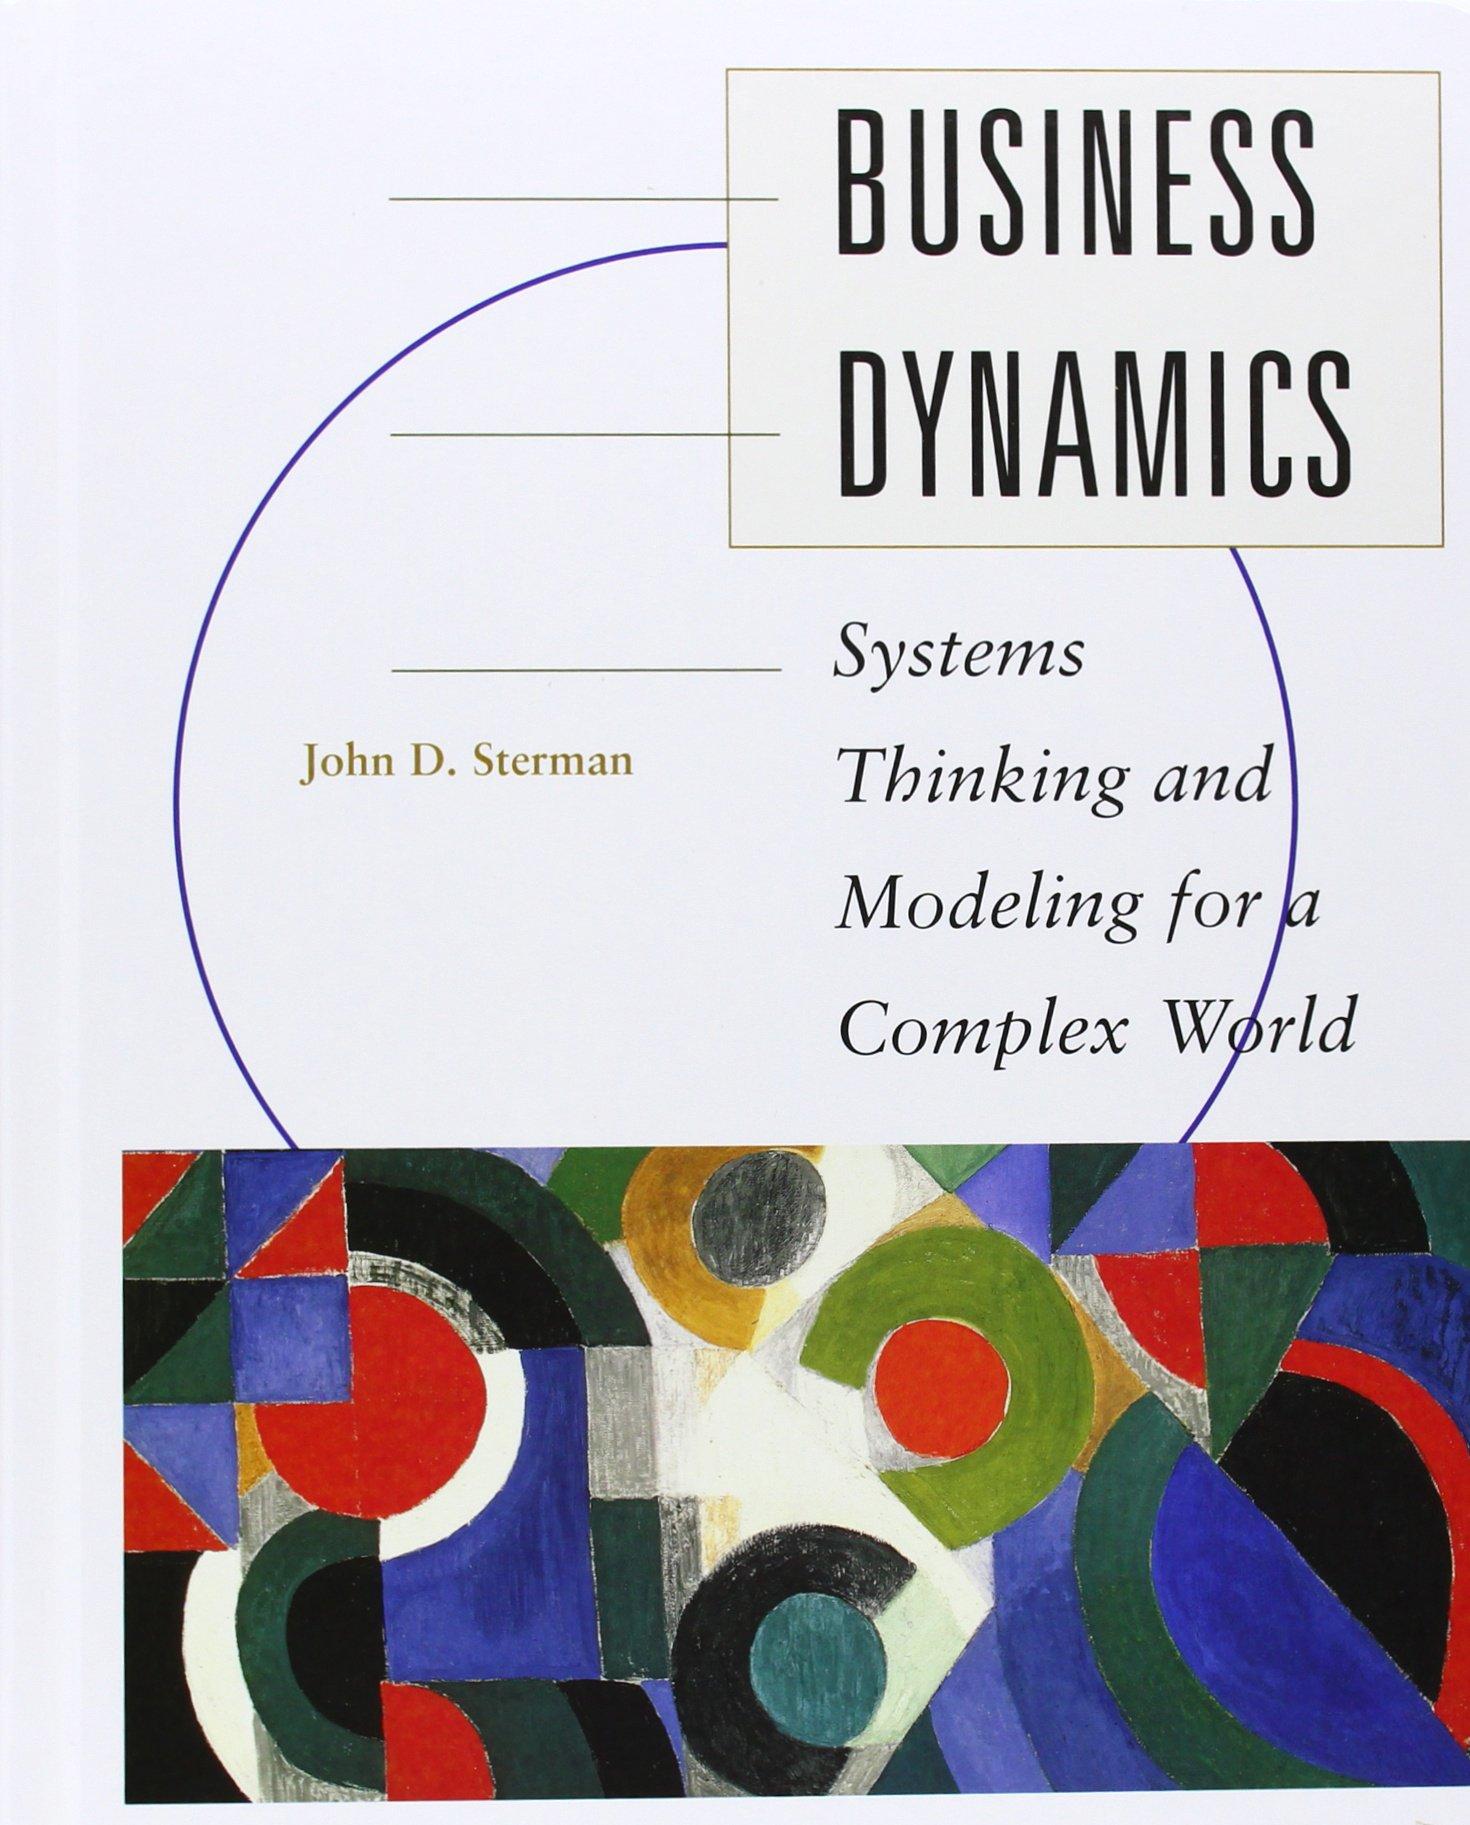 business dynamics systems thinking and modeling for a complex world 1st edition john sterman, john d. sterman